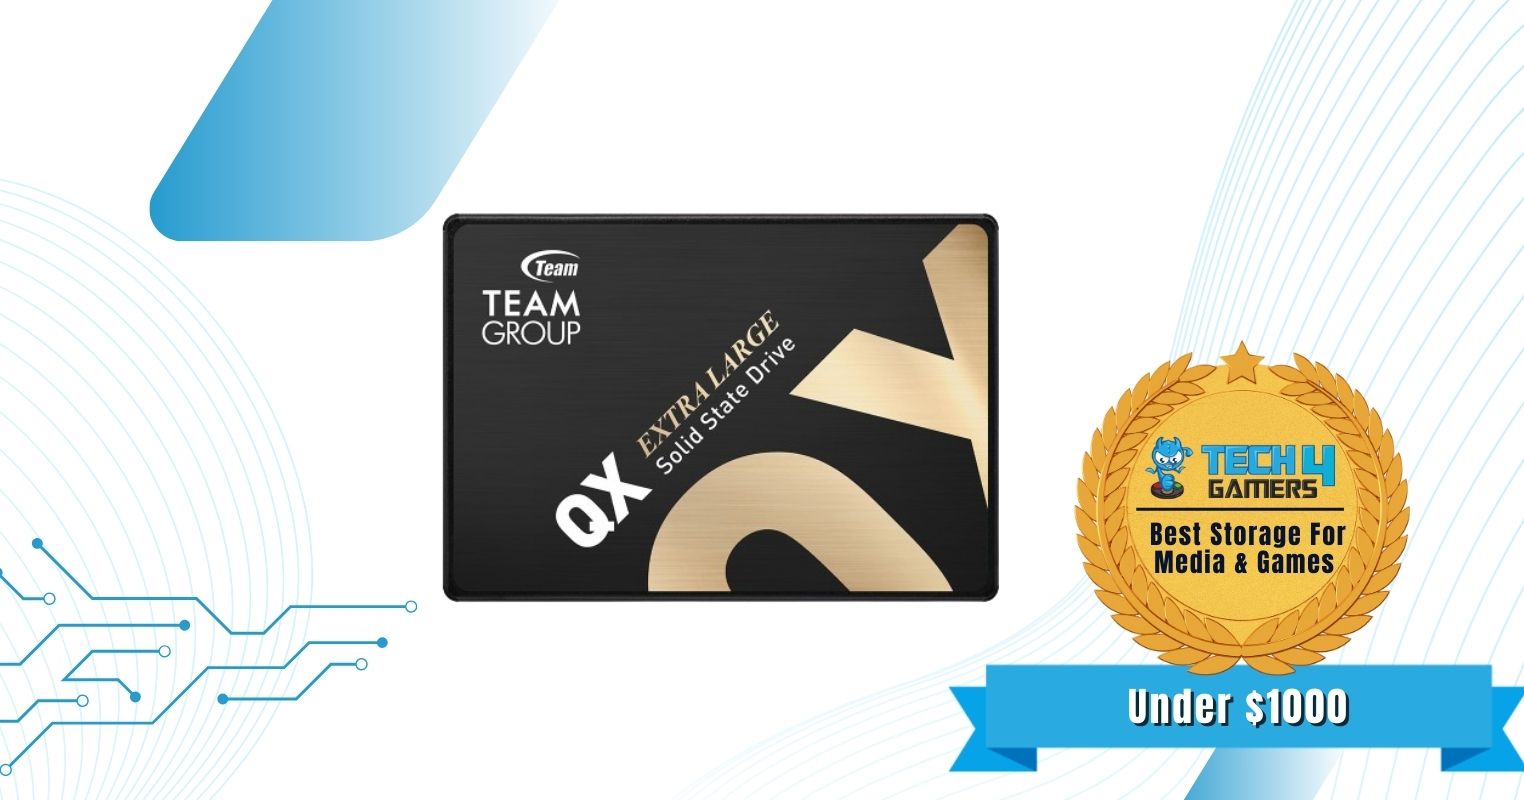 TEAMGROUP QX 2TB - Best $1000 Gaming PC Build Storage For Media & Games